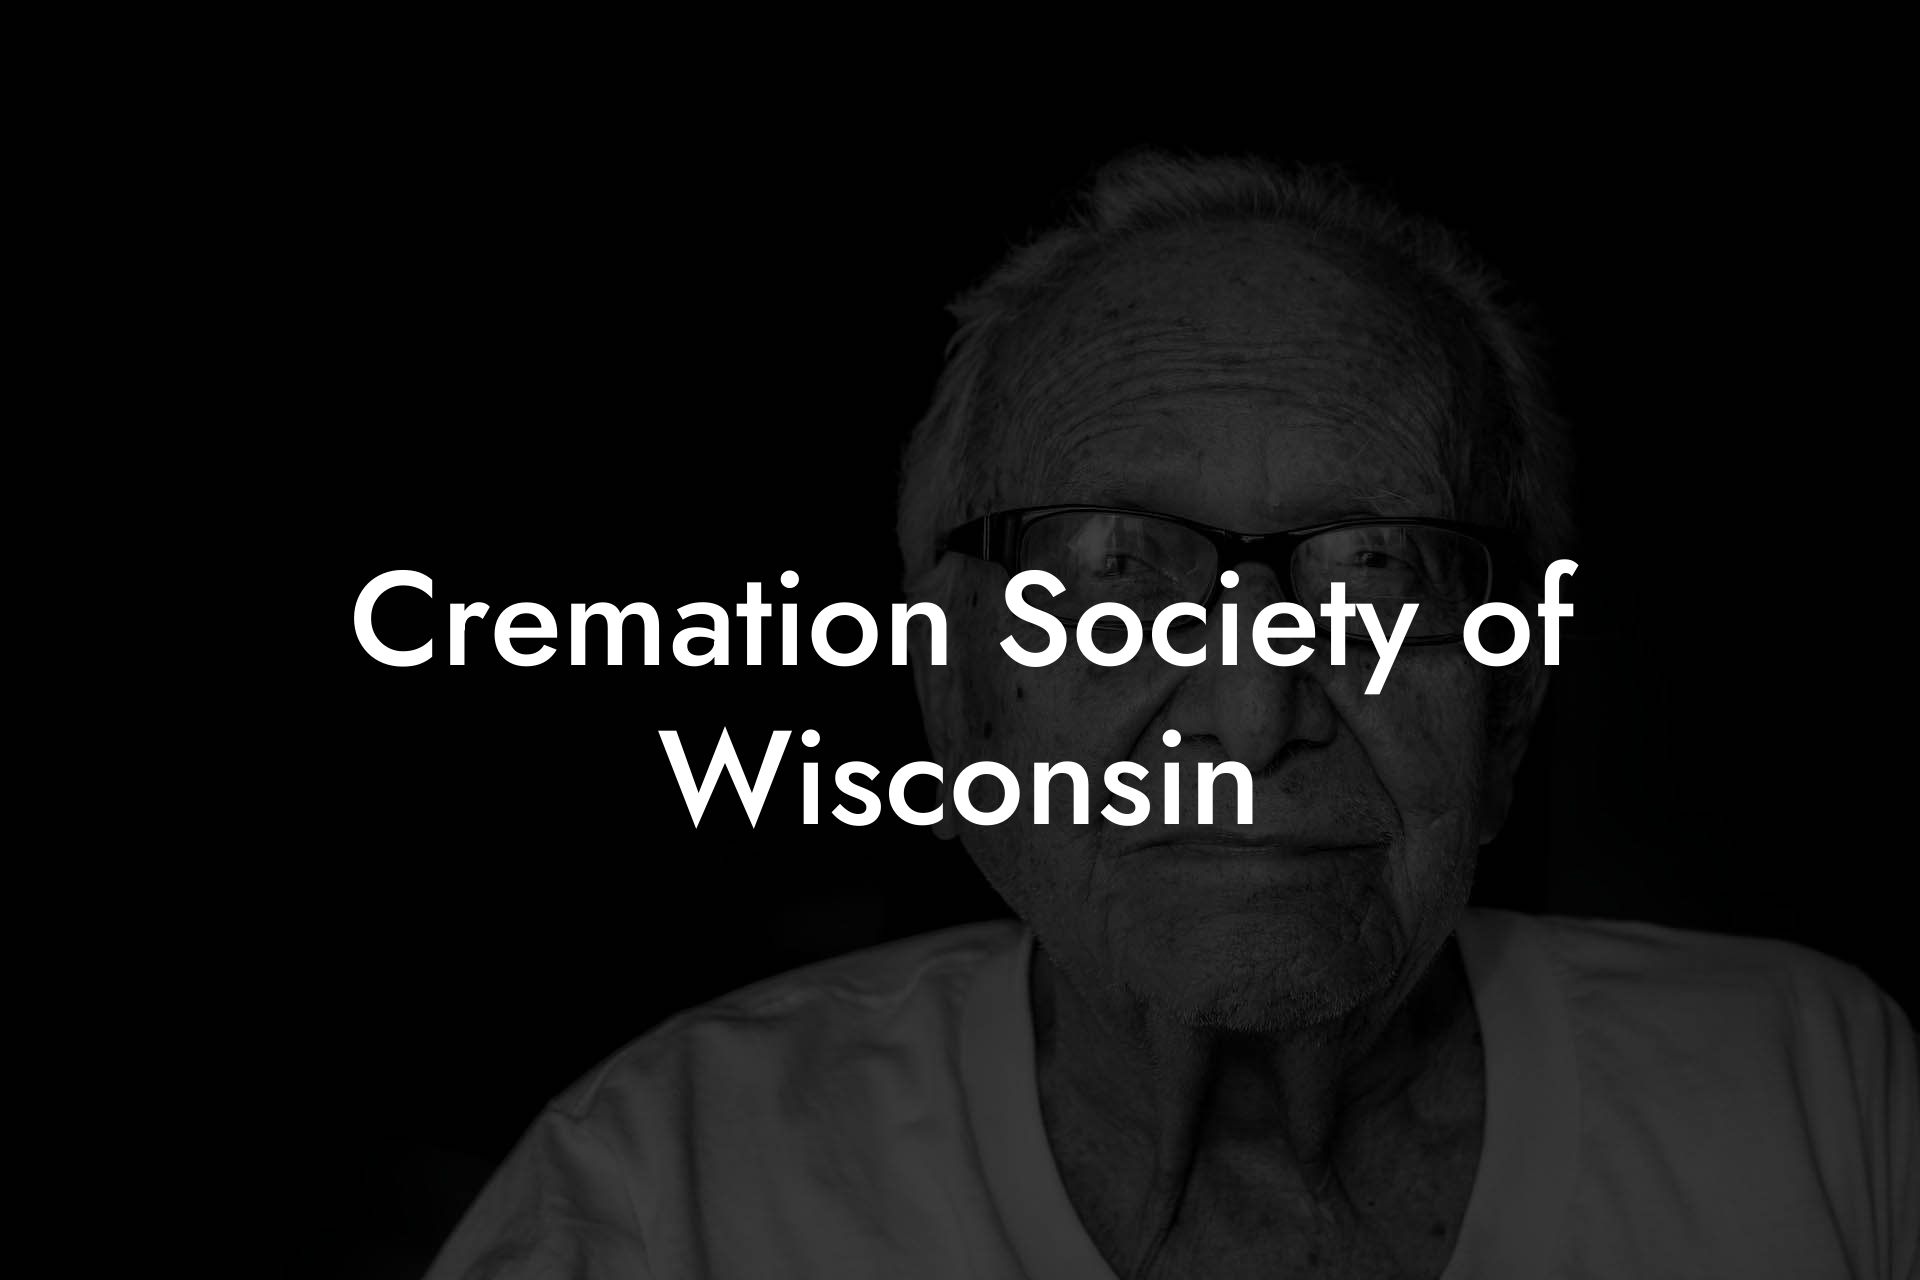 Cremation Society of Wisconsin